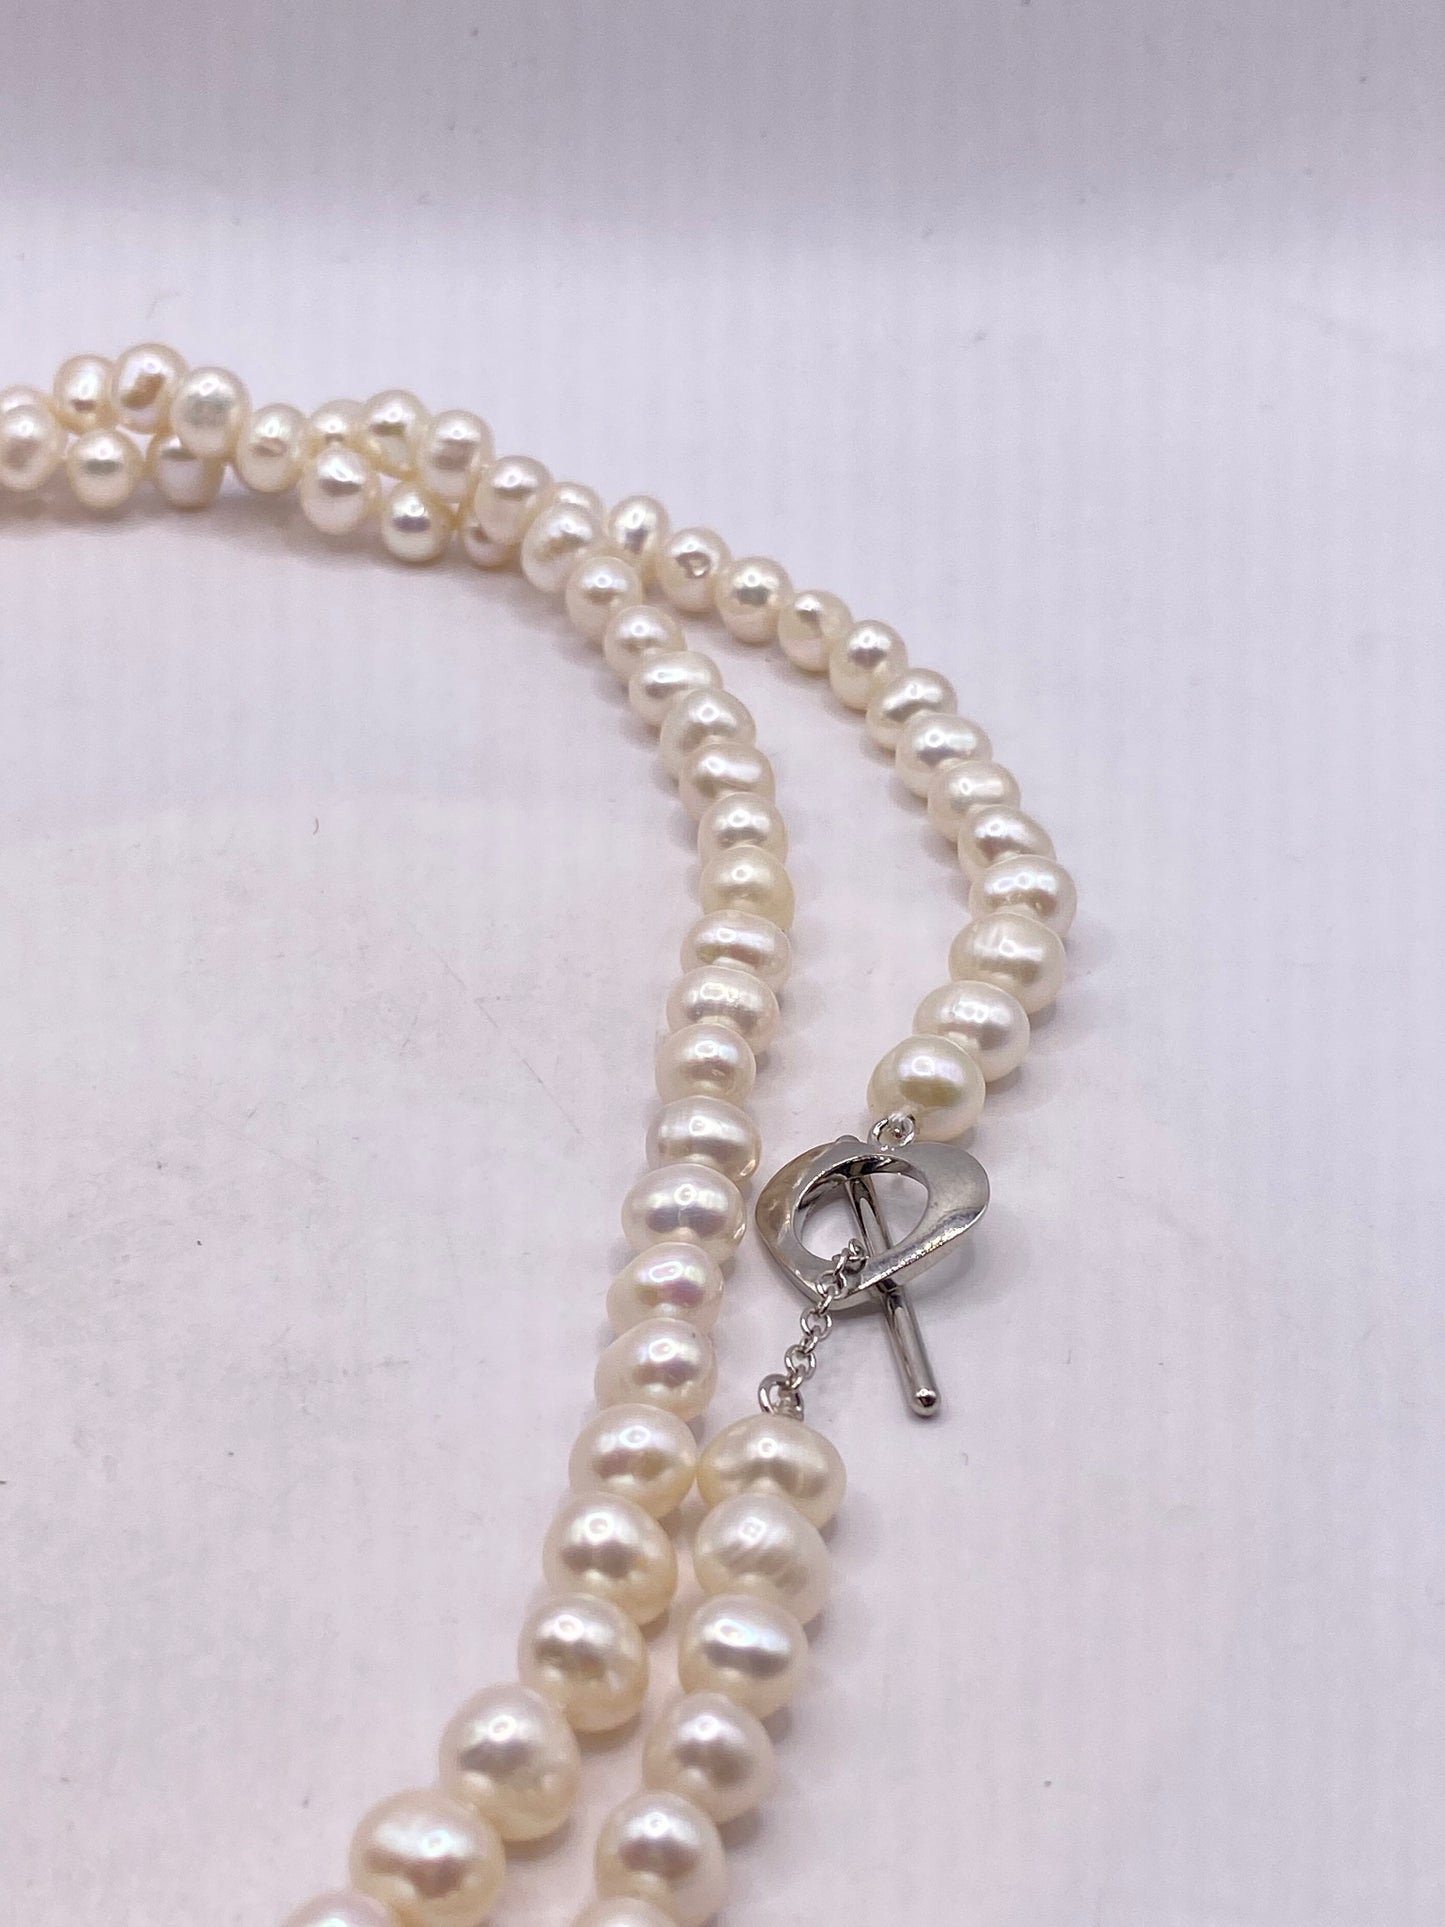 Vintage Hand Knotted White Pearl 45 inch Necklace